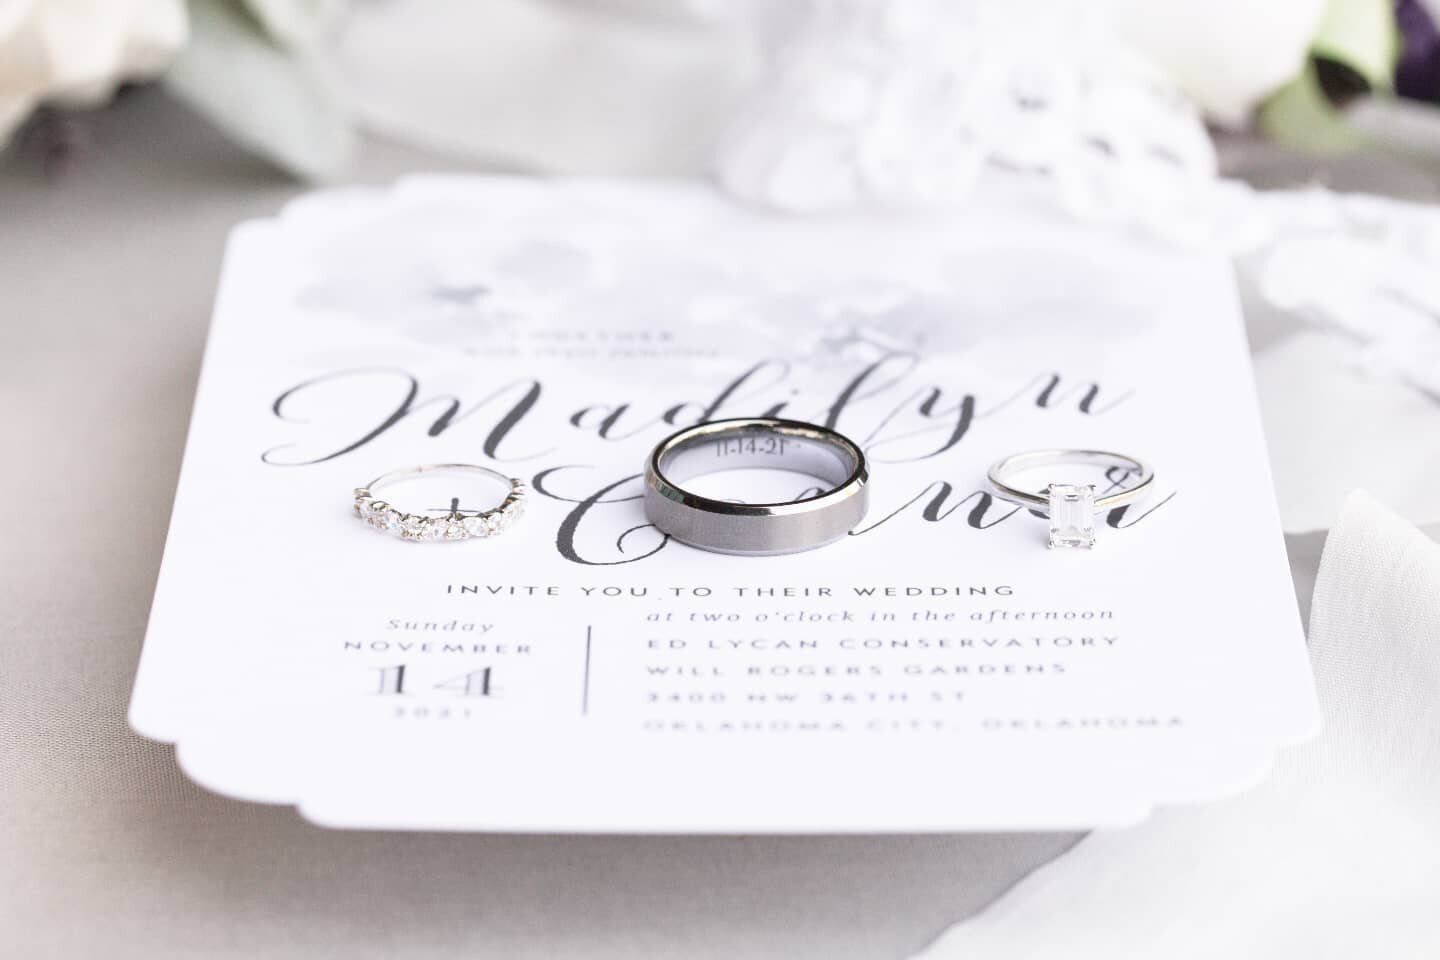 Wrapped up our final wedding for 2021! It couldn't have been a more perfect day. #okcweddings #komorebibrides
#shesaidyes #oklahomaweddings #fallweddings #invite #details #love
Looking forward to all of my 2022 Brides!